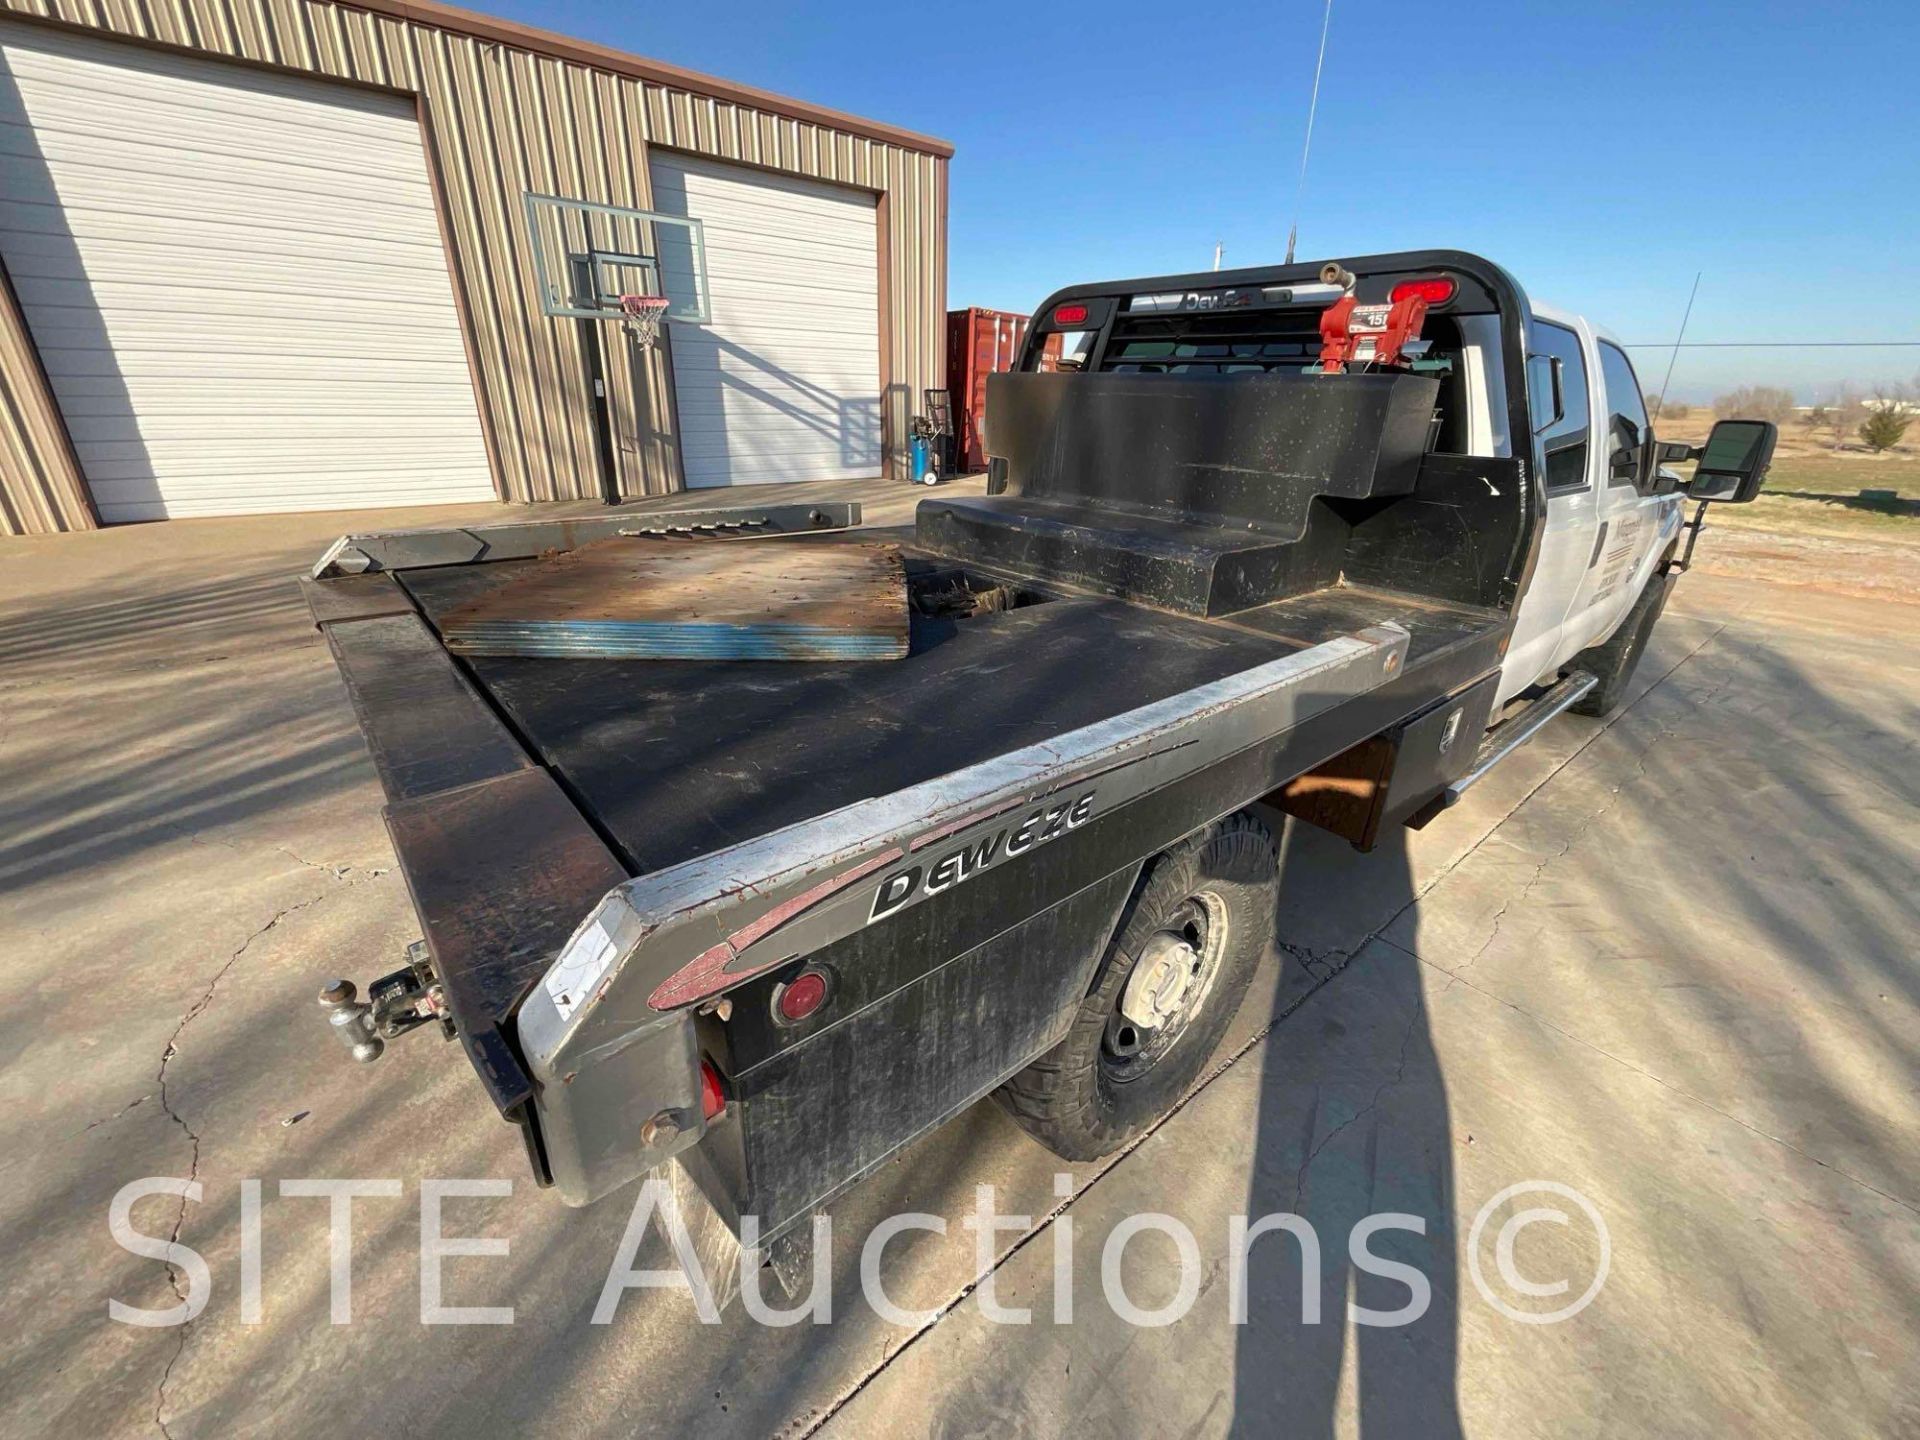 2011 Ford F250 SD Crew Cab Flatbed Truck - Image 15 of 31